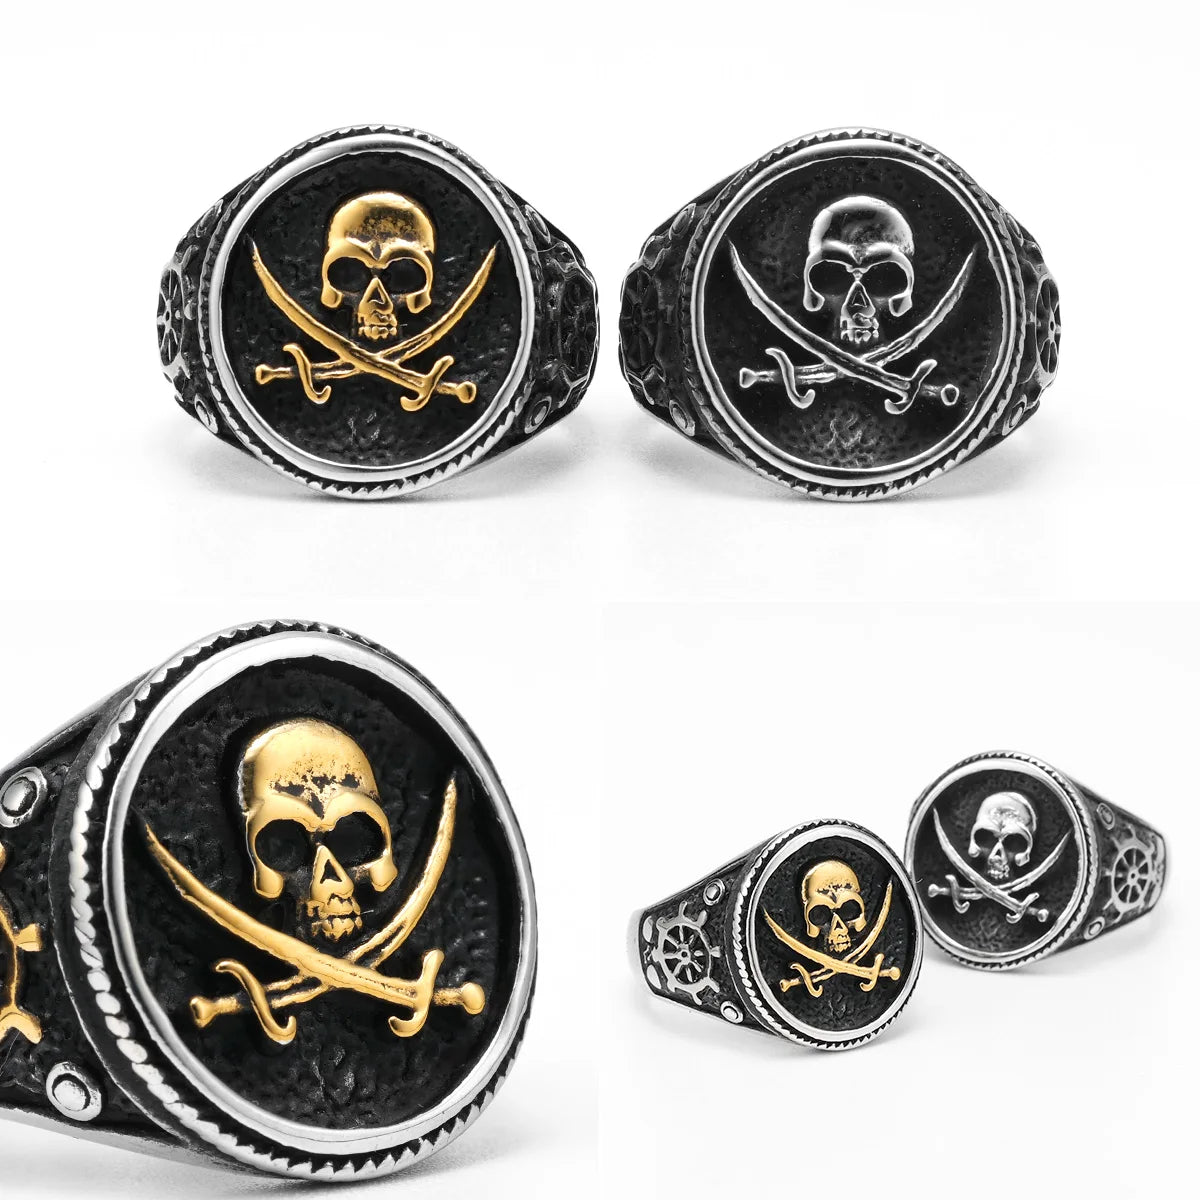 Pirate Skull with Crossing Swords Ring. Skull rings for men. Badass gifts for badass. Badass birthday gifts. Badass Christmas gifts for badasses. Badass skull accessories. Valentine gifts for him. Anniversary gift for him. Anniversary gift for my badass husband. Badass Birthday gift for my badass boyfriend. Badass Birthday gift for my badass husband. Pirate skull rings.